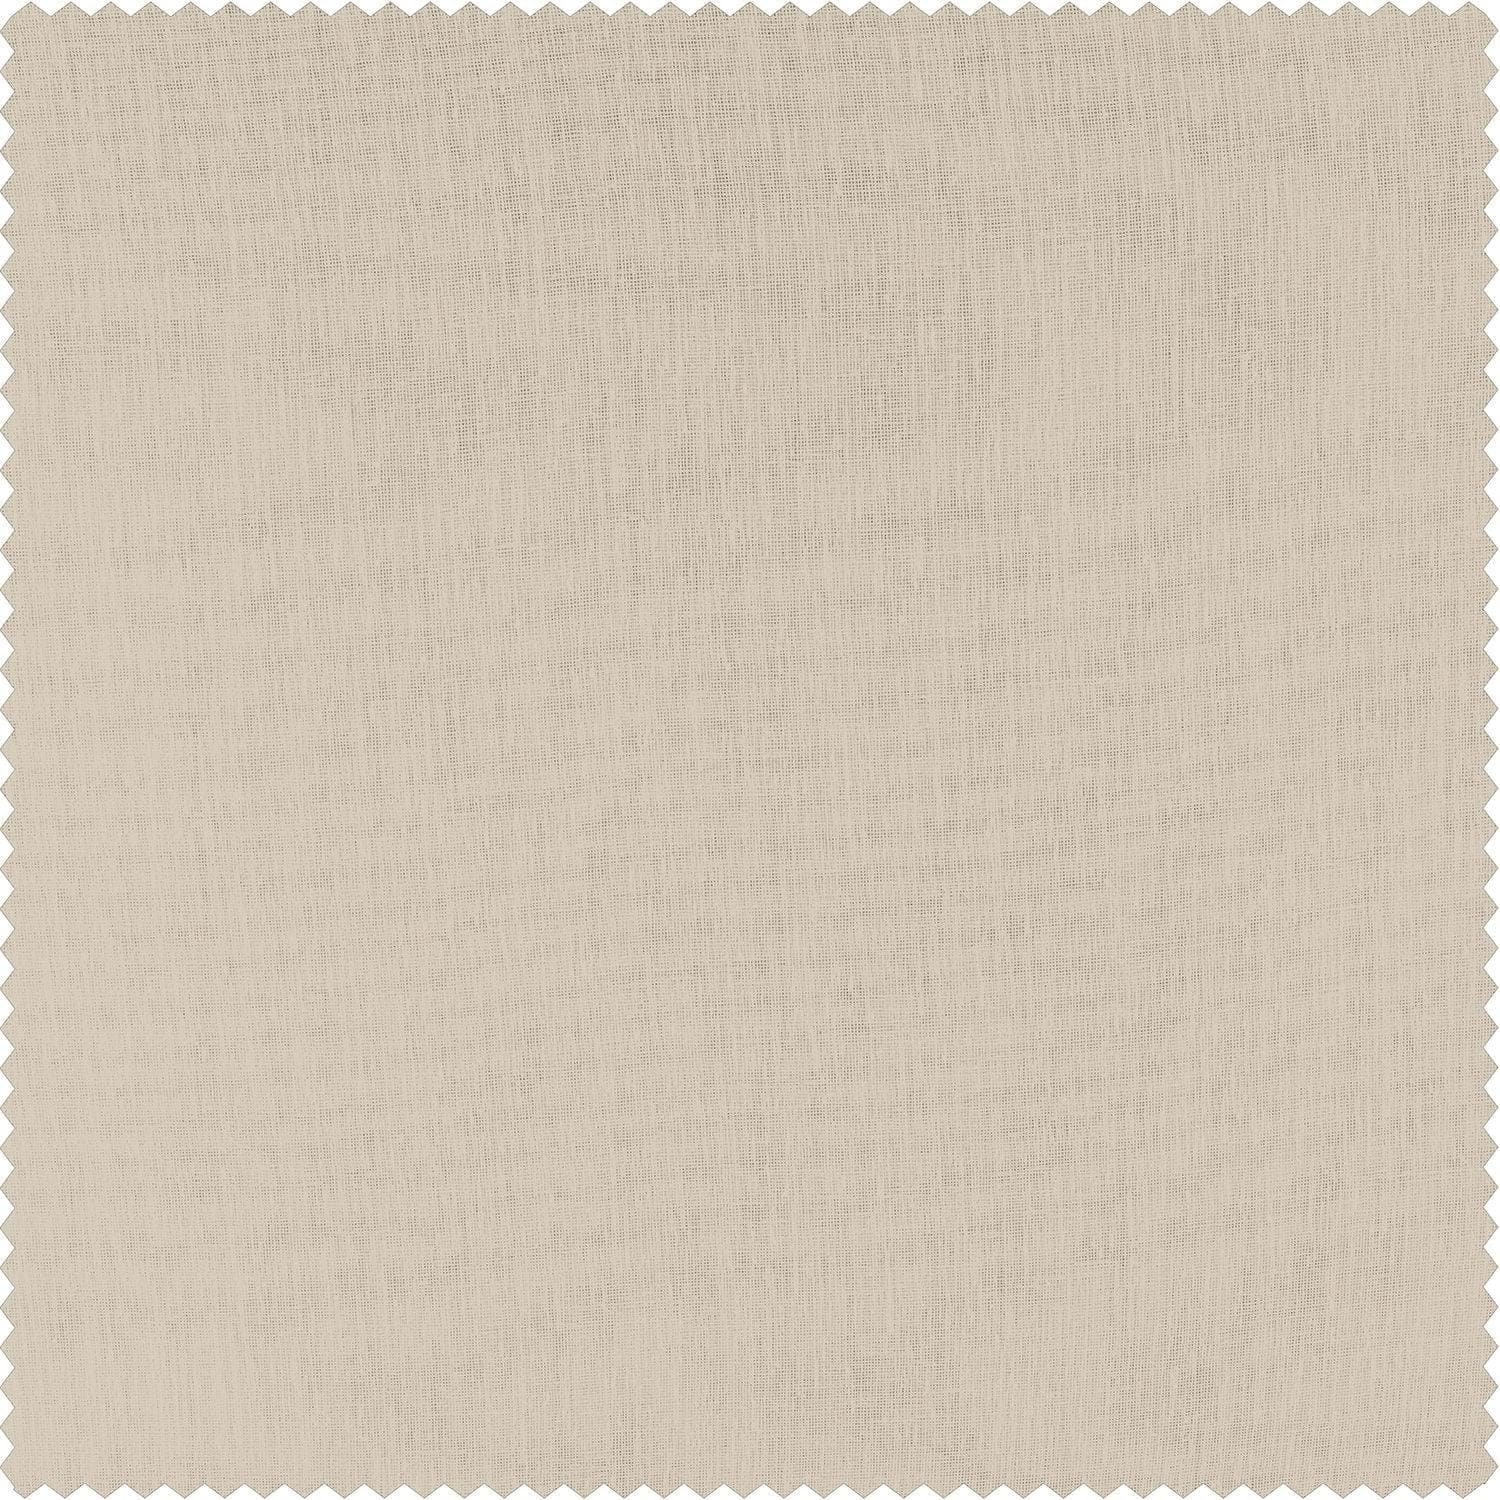 Cotton Seed Grommet Textured Faux Linen Sheer Curtain